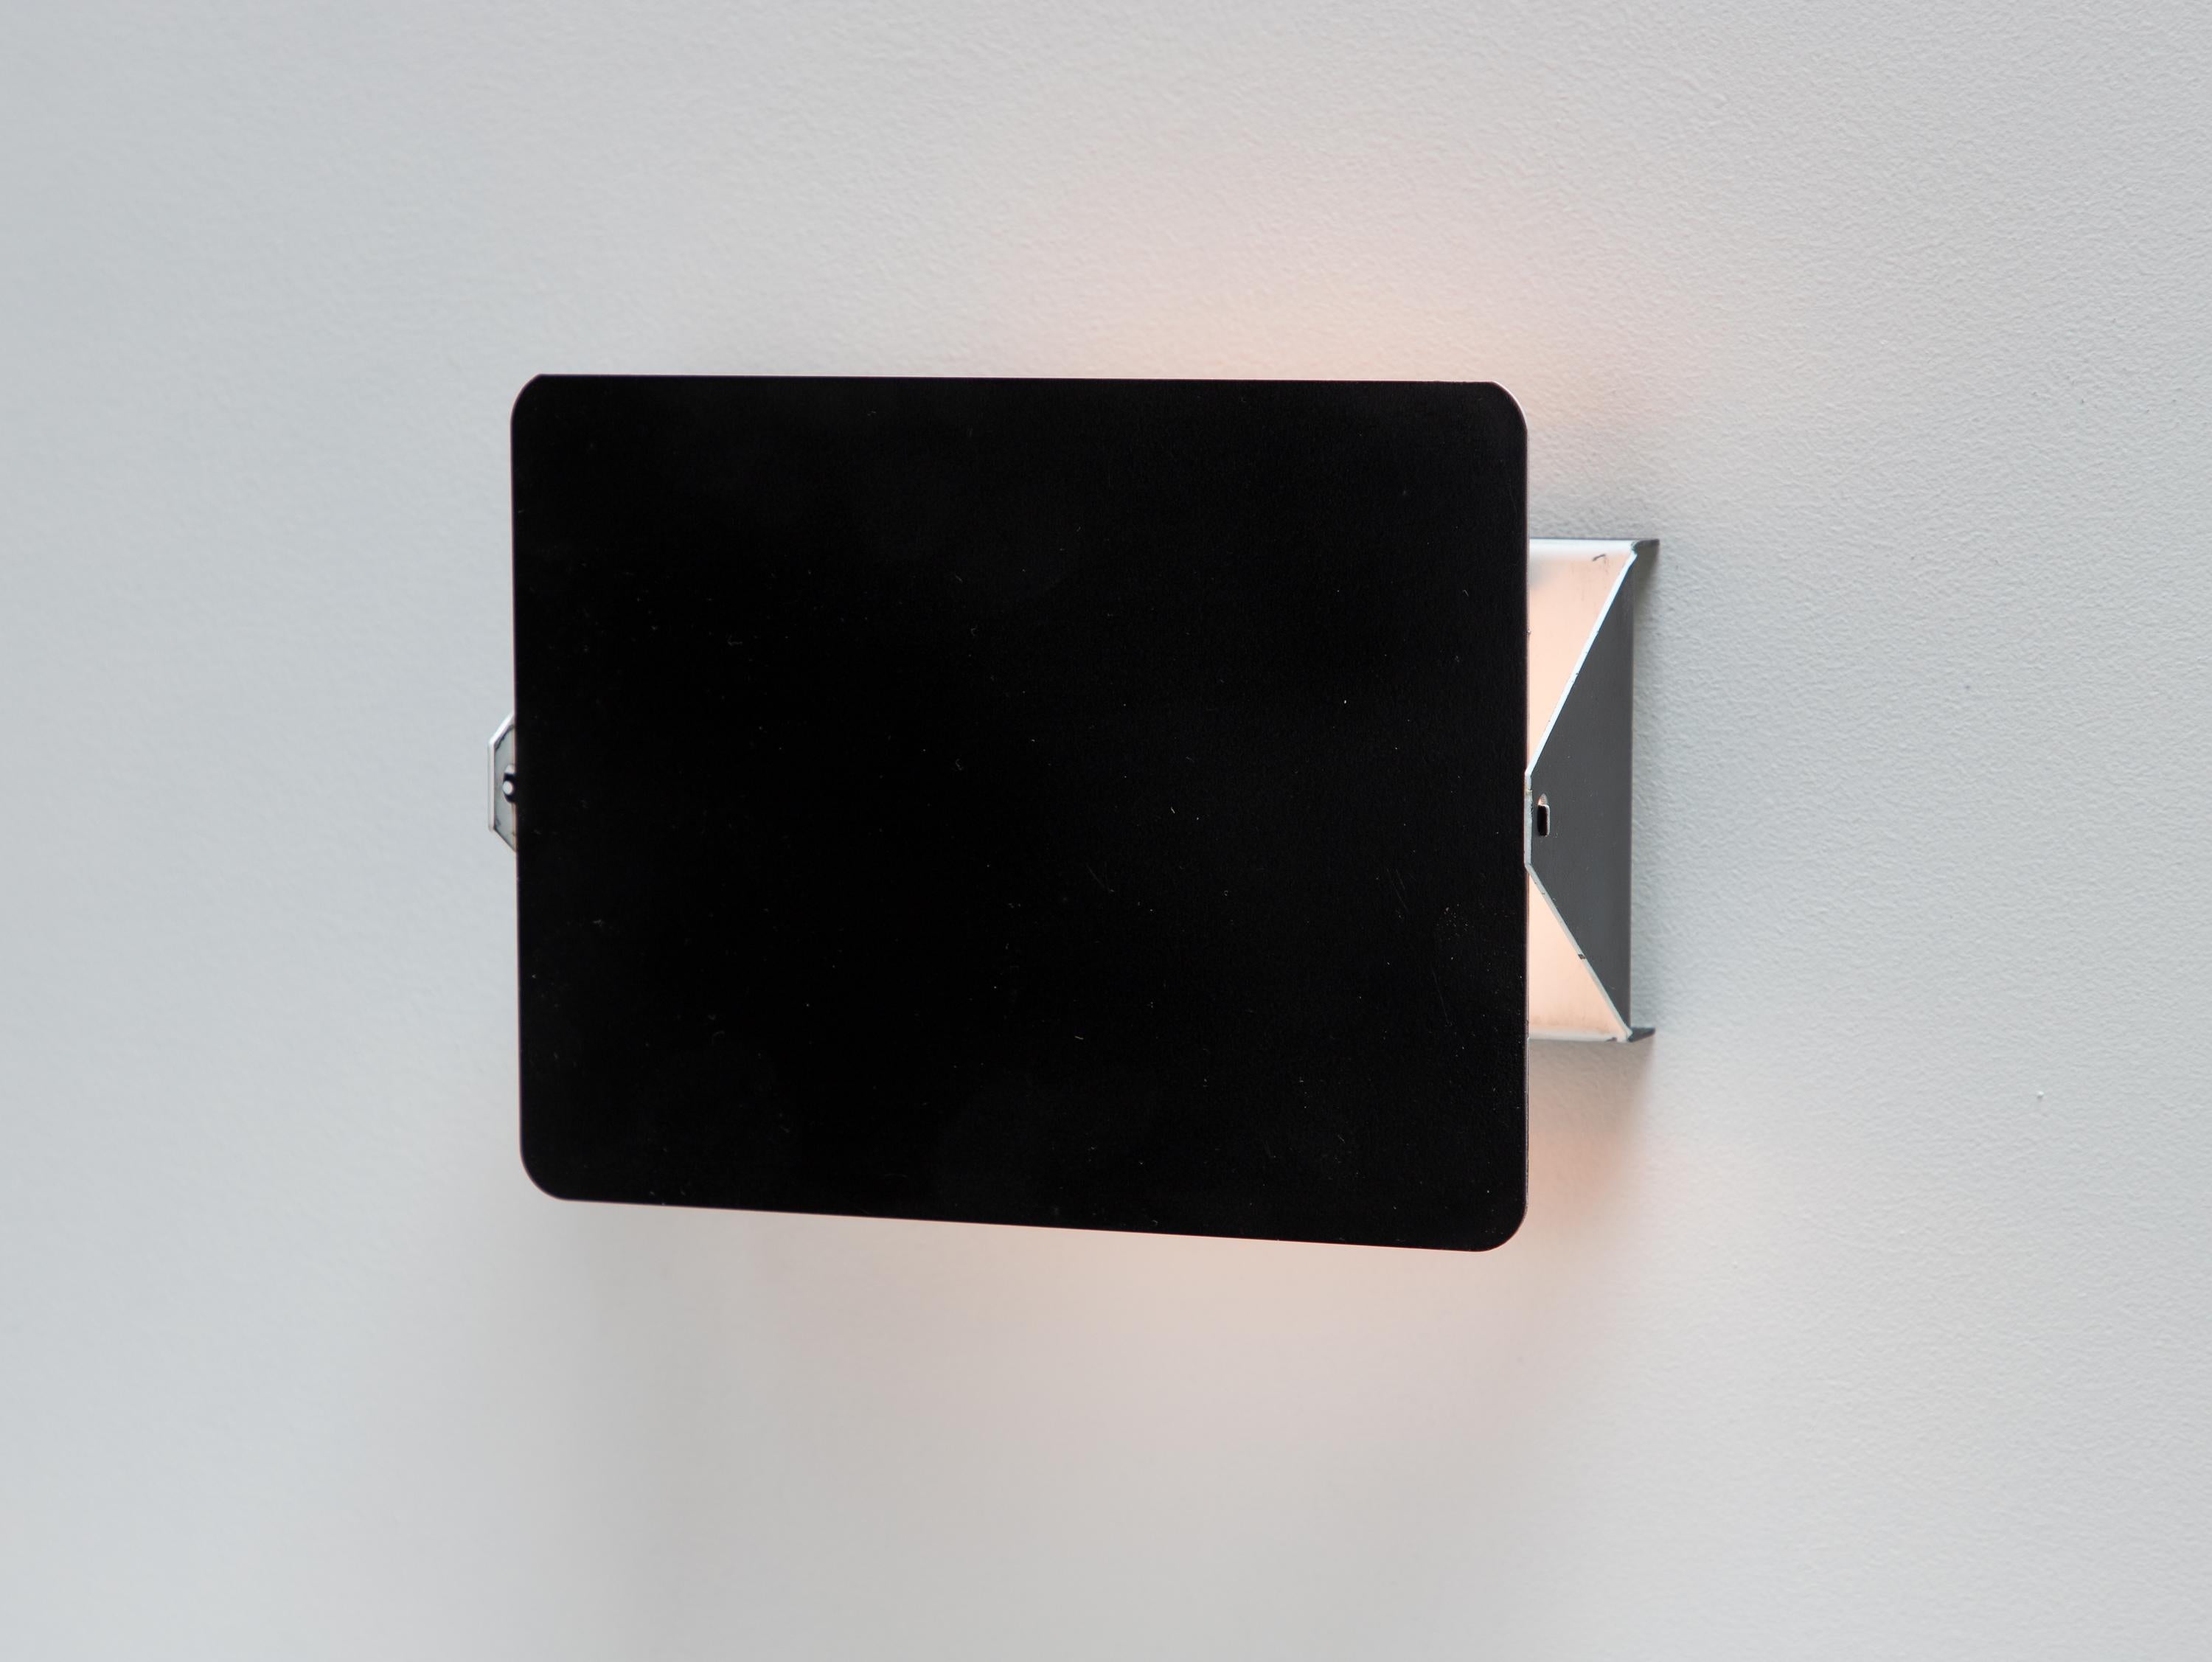 French Vintage Charlotte Perriand Les Arcs CP1 Wall Light or Sconces - Black For Sale